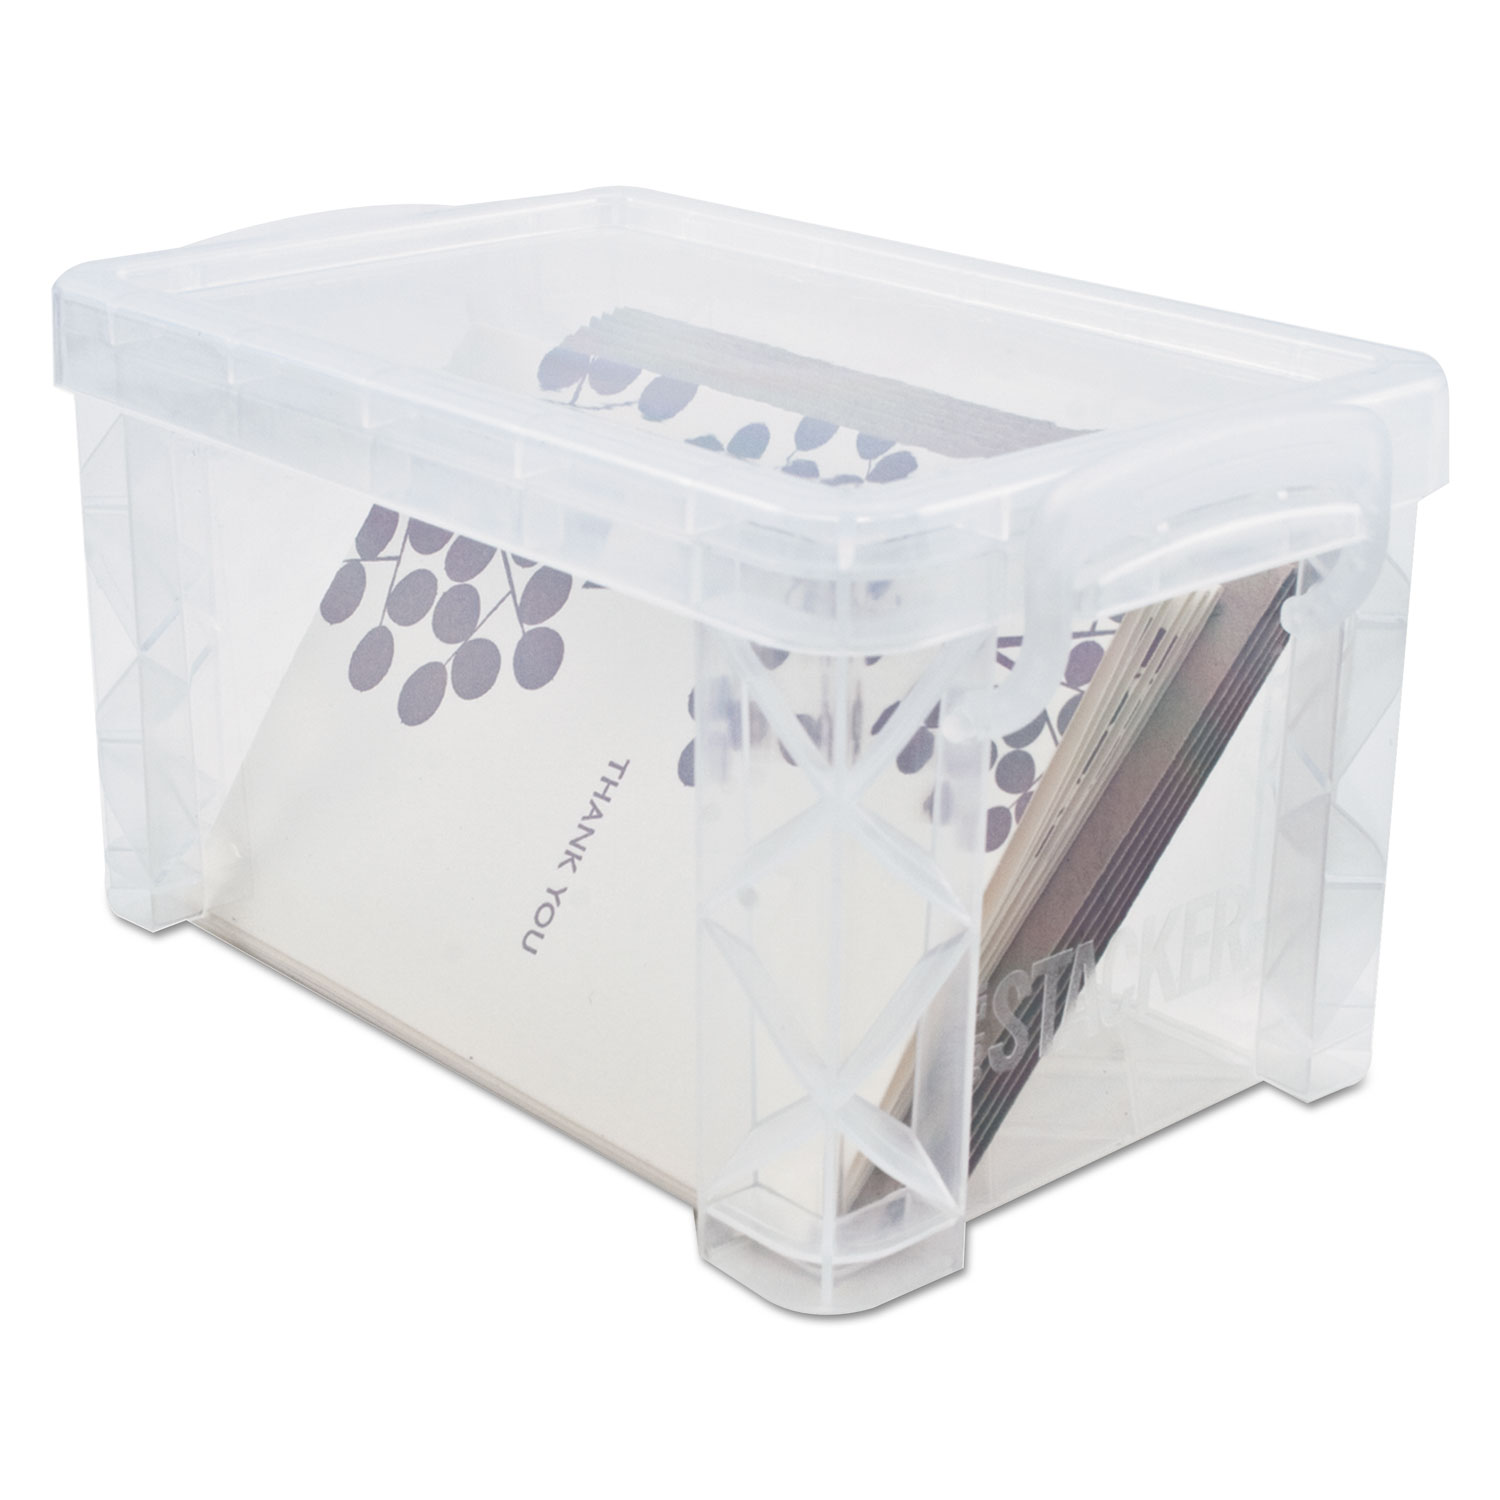 Super Stacker Storage Boxes, Hold 400 3 x 5 Cards, Plastic, Clear